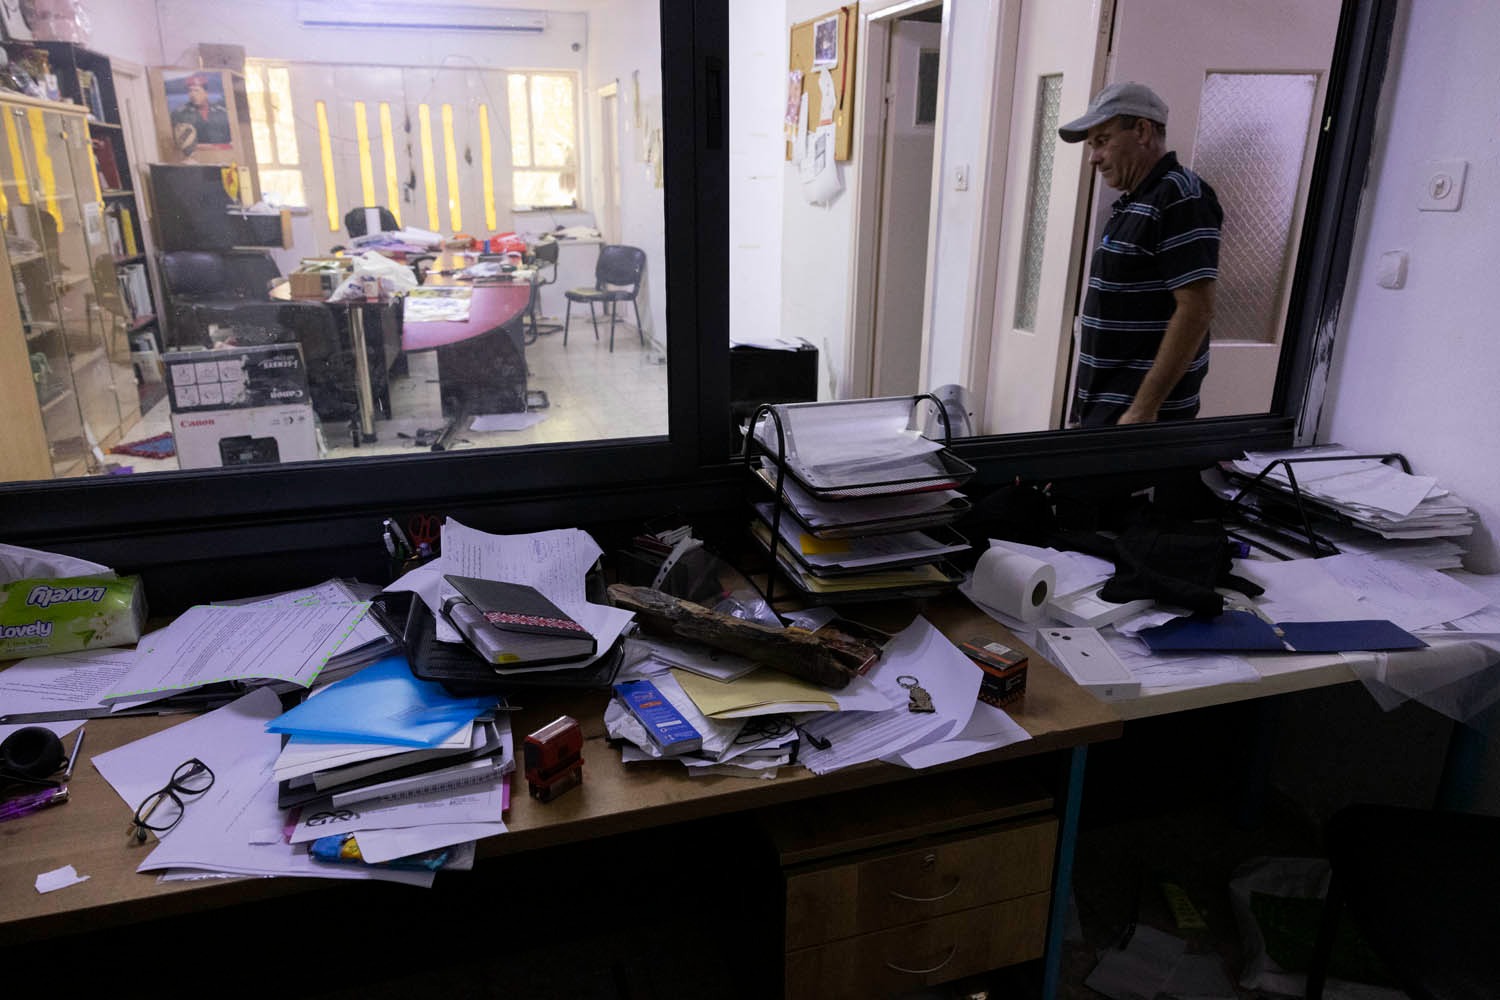 The office of the Union of Palestinian Women's Committees following an Israeli army raid, Ramallah, West Bank, August 18, 2022. (Oren Ziv)